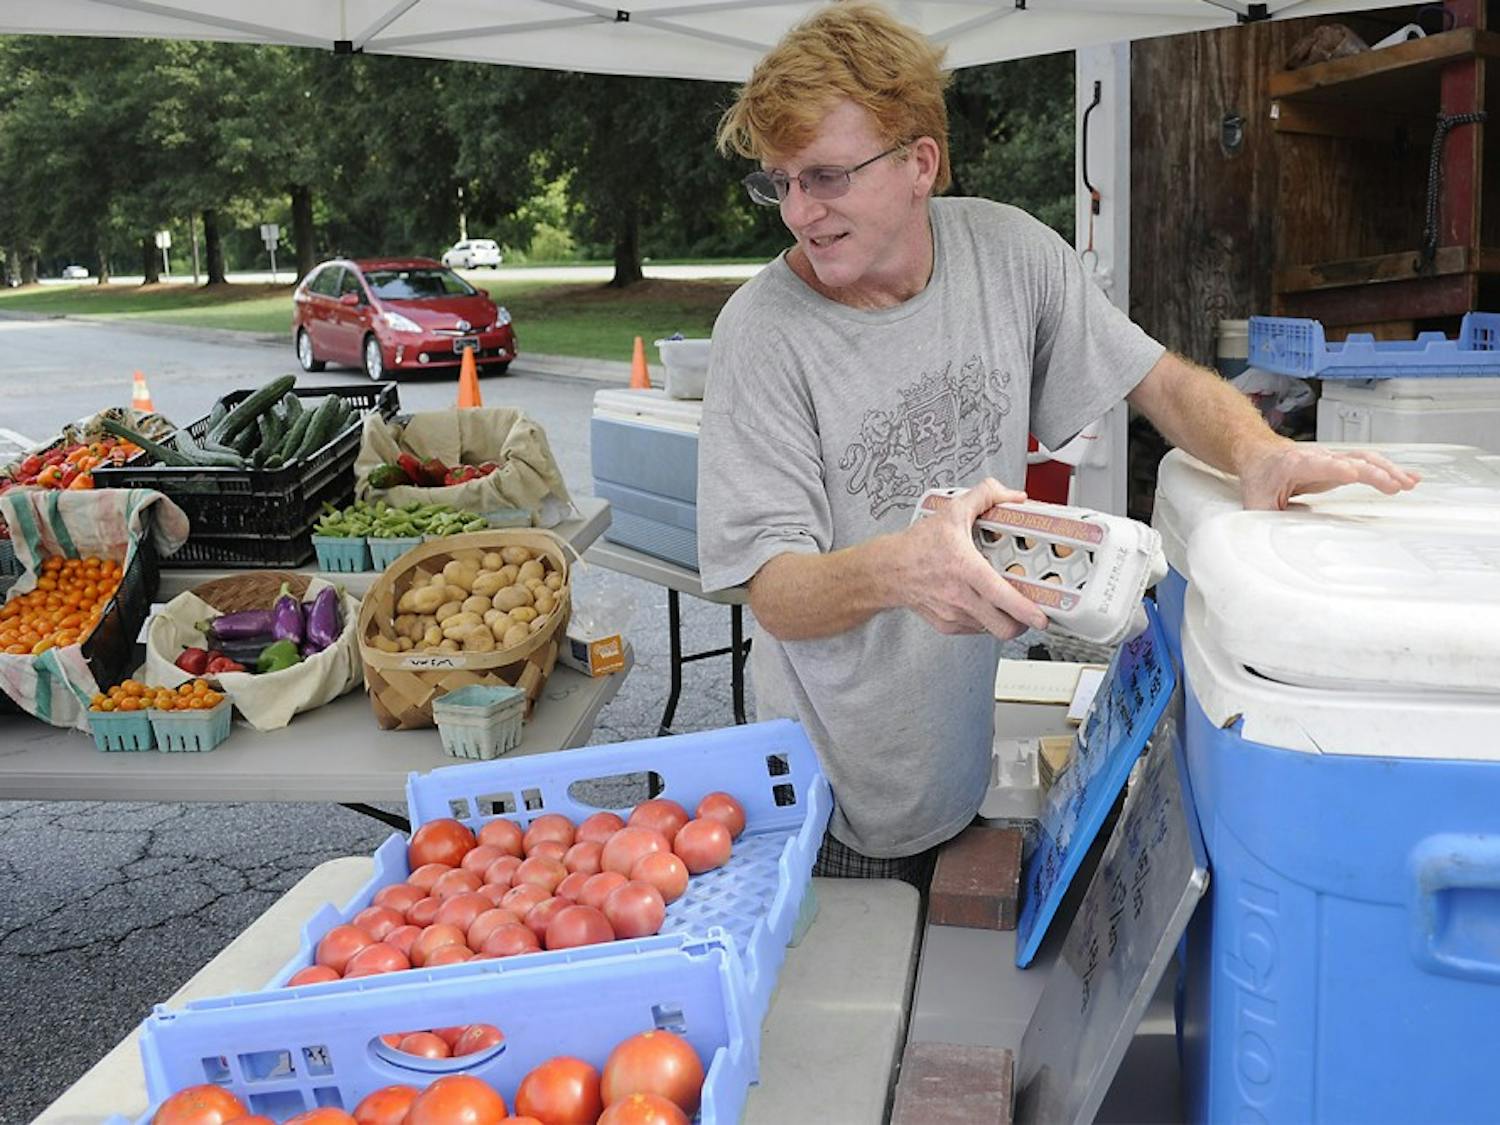 Ben Bergmann, a farmer from Fickle Creek Farm, has been a participant of the Chapel Hill Market for 12 years.   Taking place in the parking lot of University Mall, the market is has moved its location several times.  With the prospect of having a permanent home, Bergman says, "I wish it could be here permanently but it's a little tenuous to be honest.  It would be nice if we had a longer term commitment from the mall."